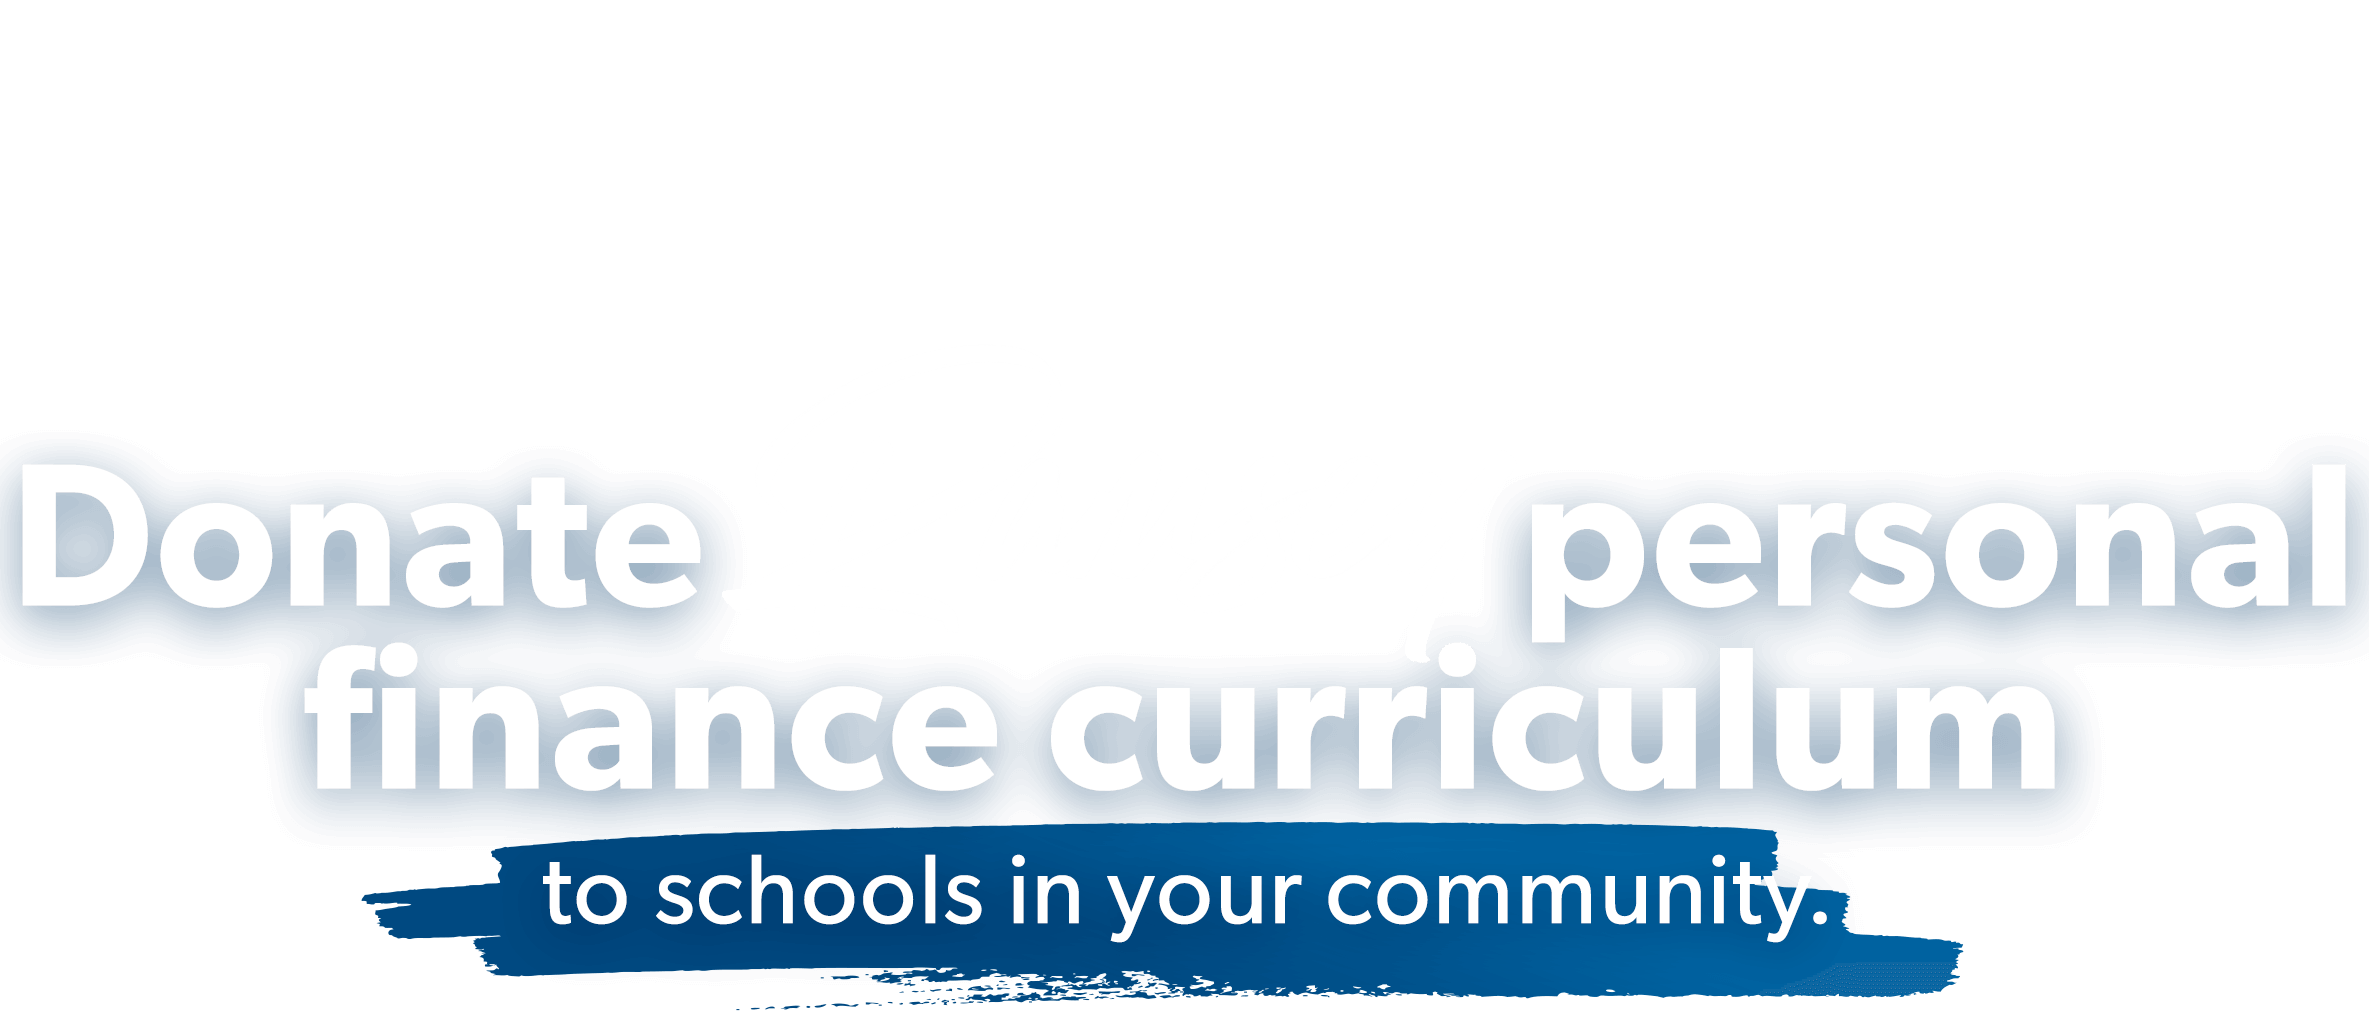 Donate Ramsey personal finance curriculum to schools in your community.